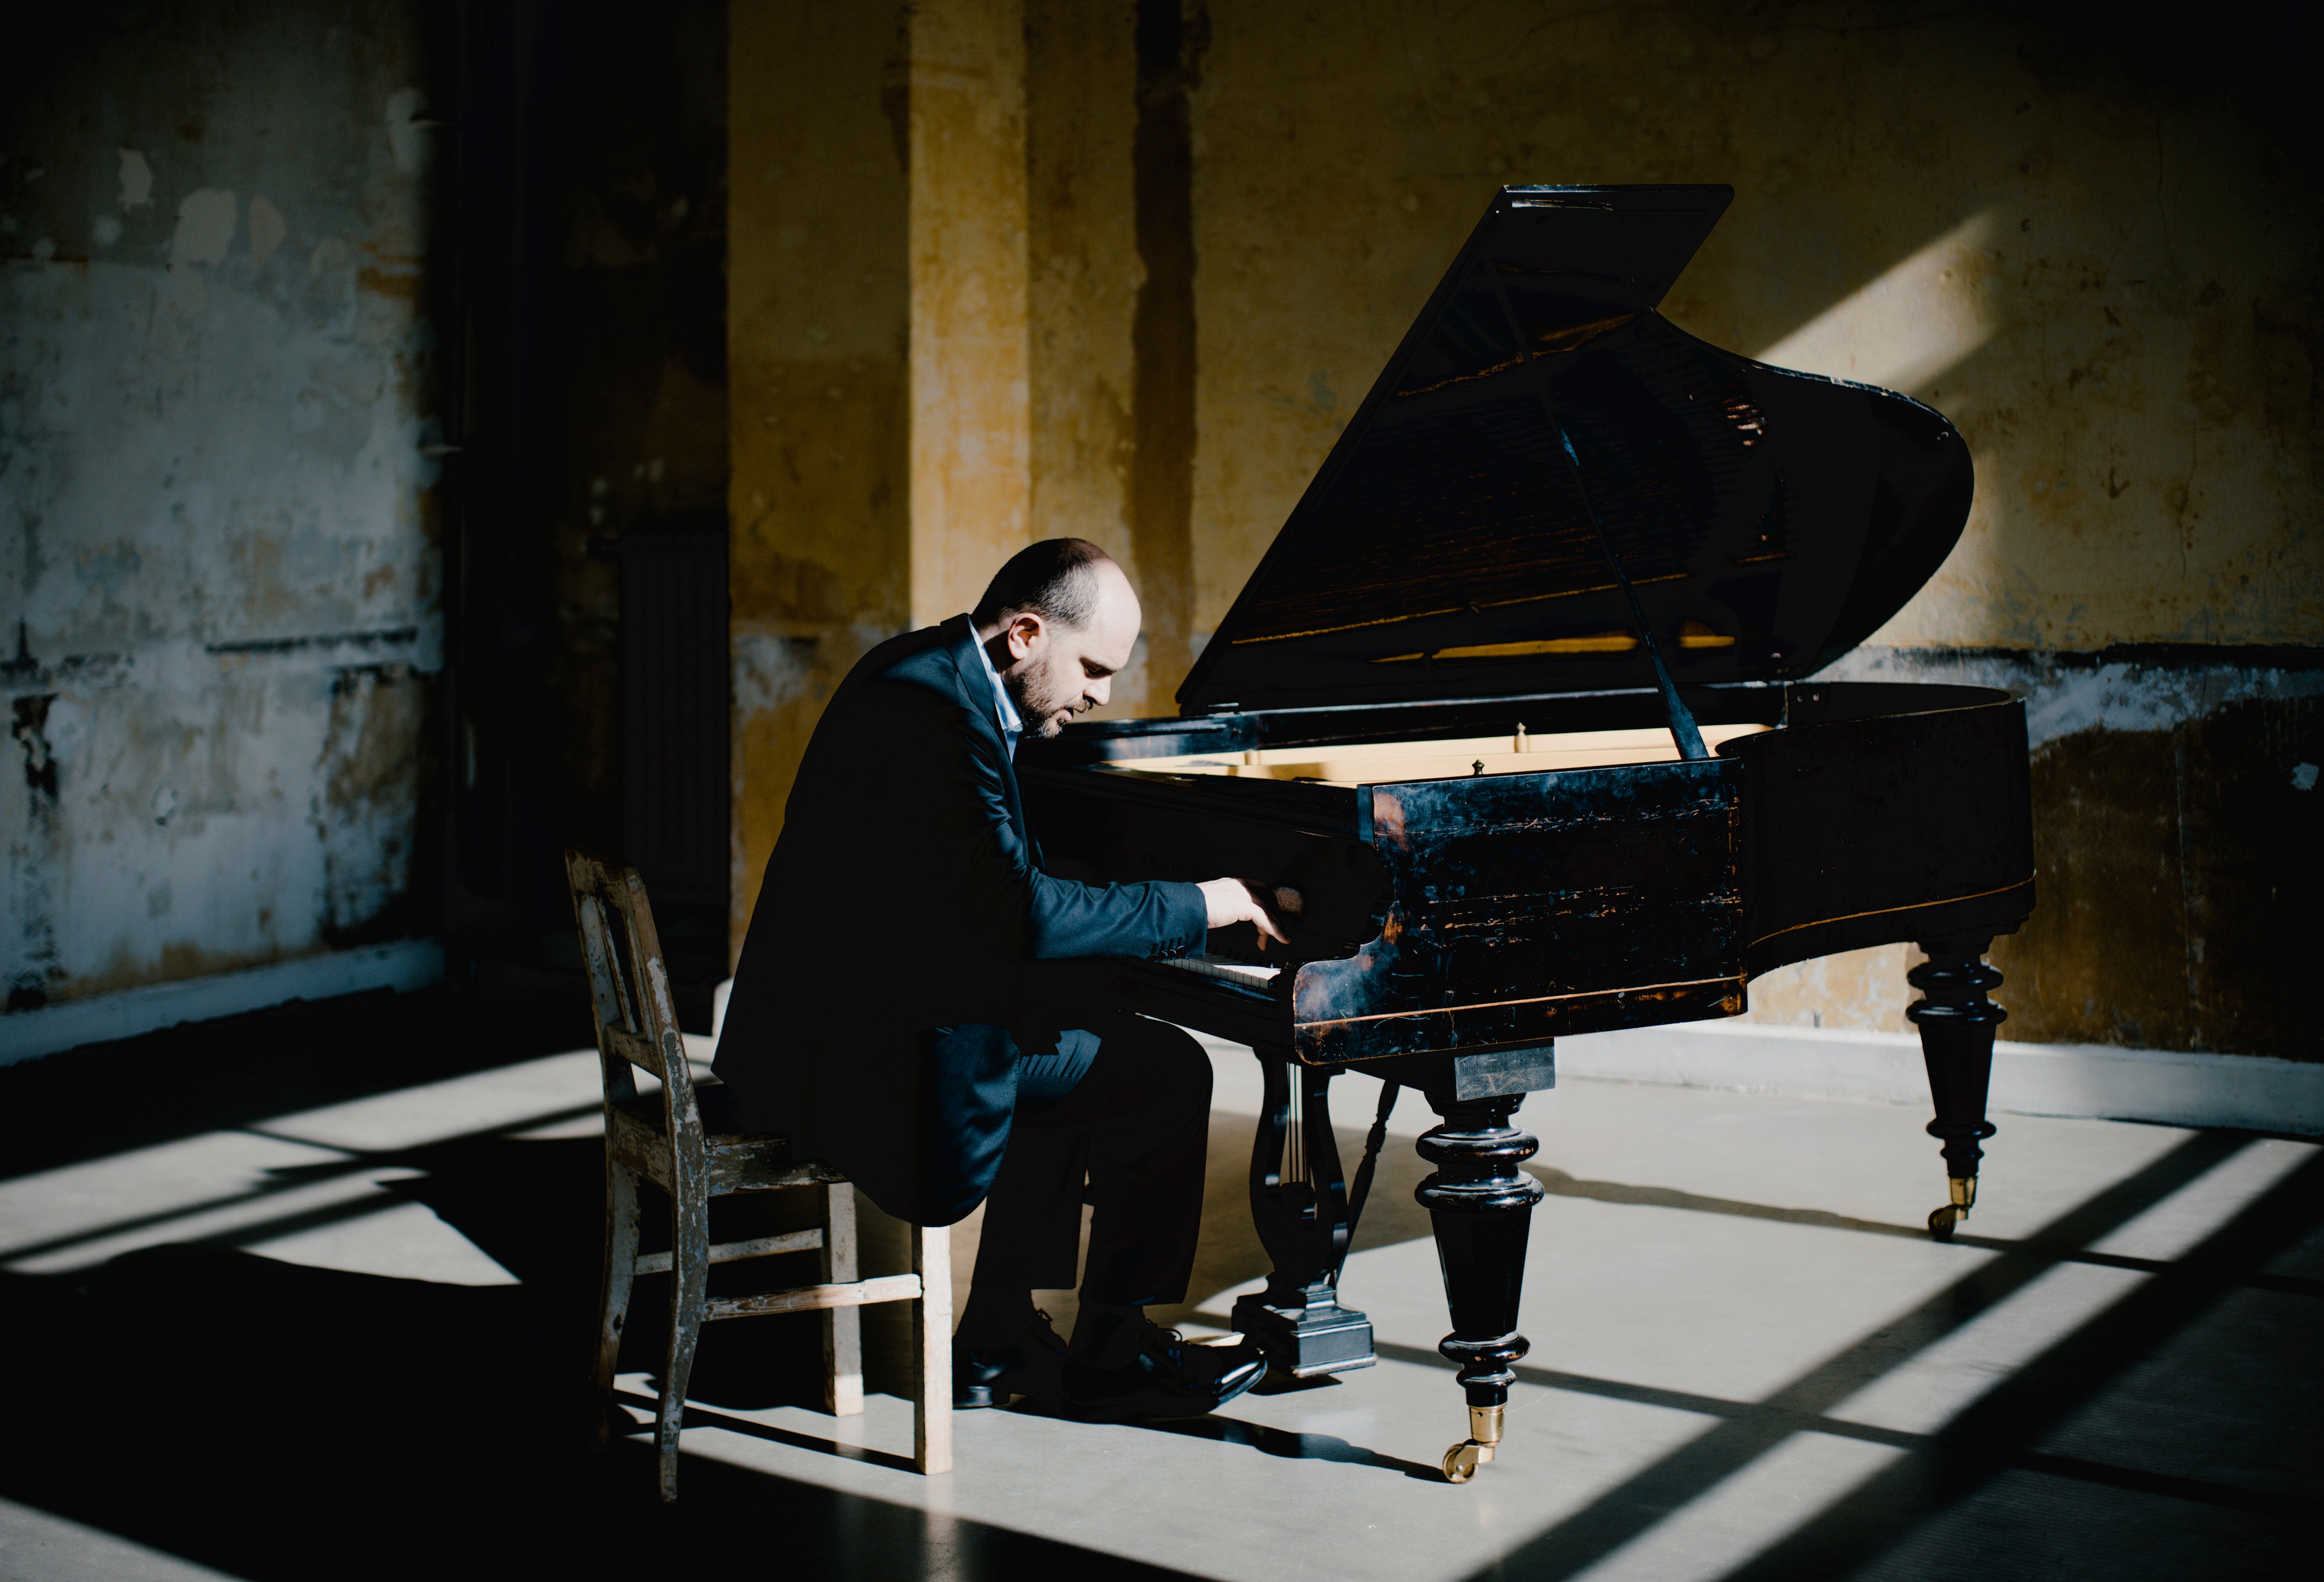 The pianist Kirill Gerstein describes Thomas Adès’s ‘In Seven Days’ as being about the birth of the universe